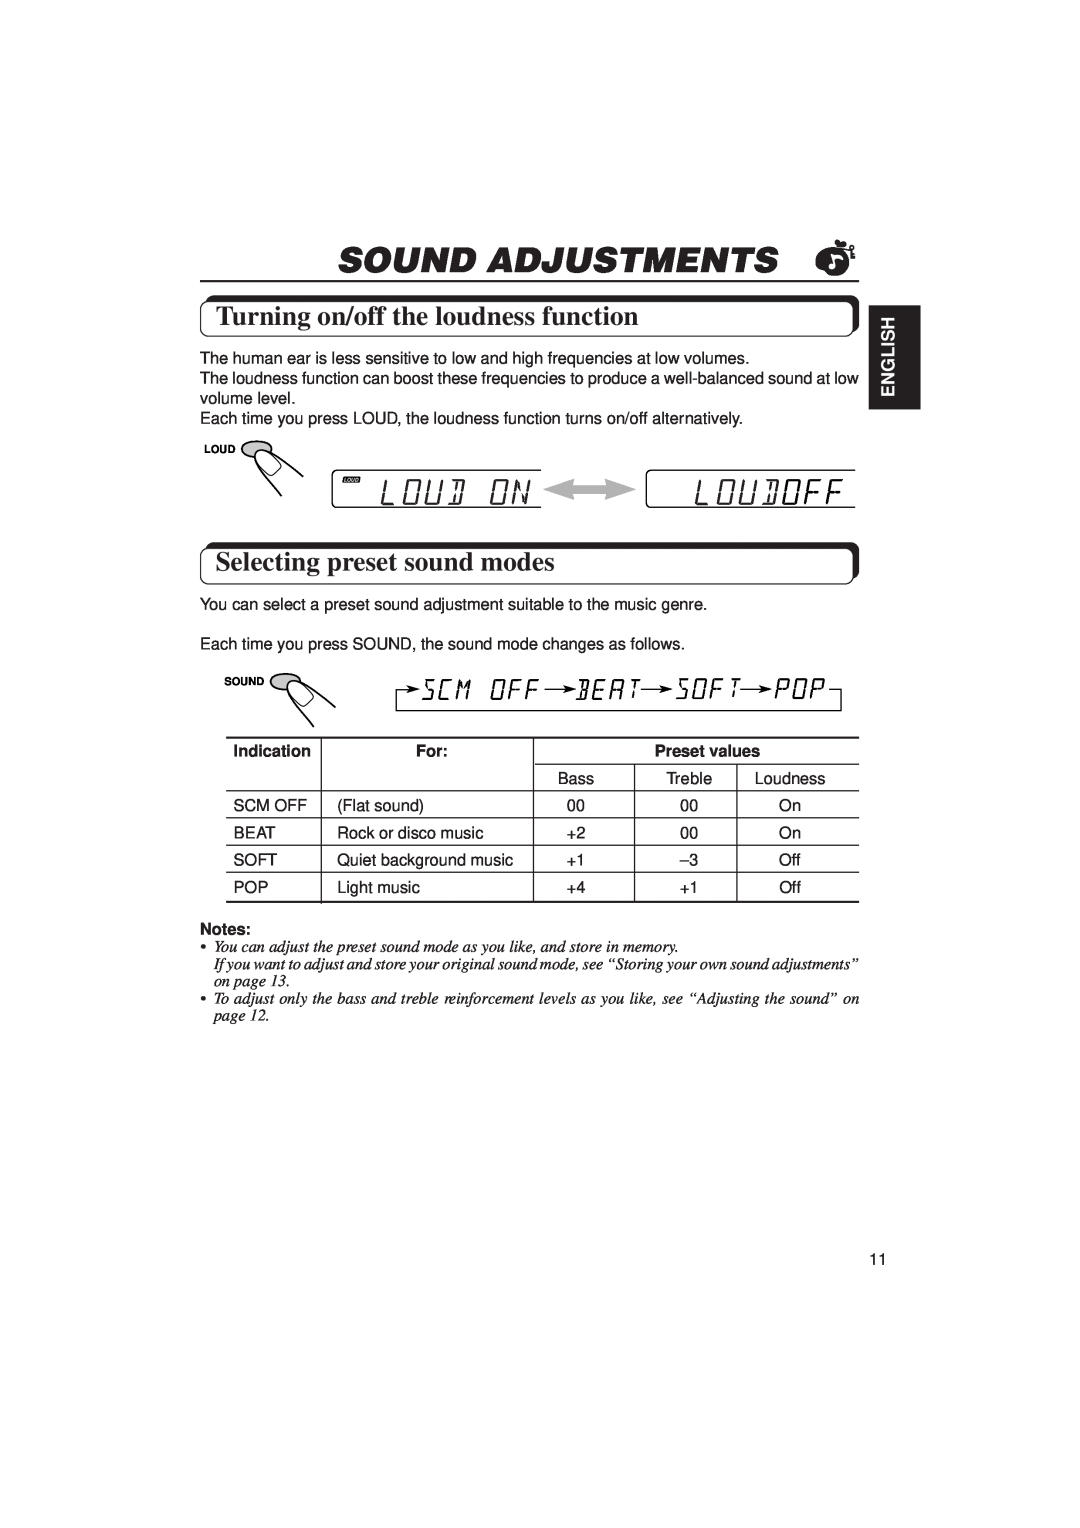 JVC F130 manual Sound Adjustments, Turning on/off the loudness function, Selecting preset sound modes, English, Indication 